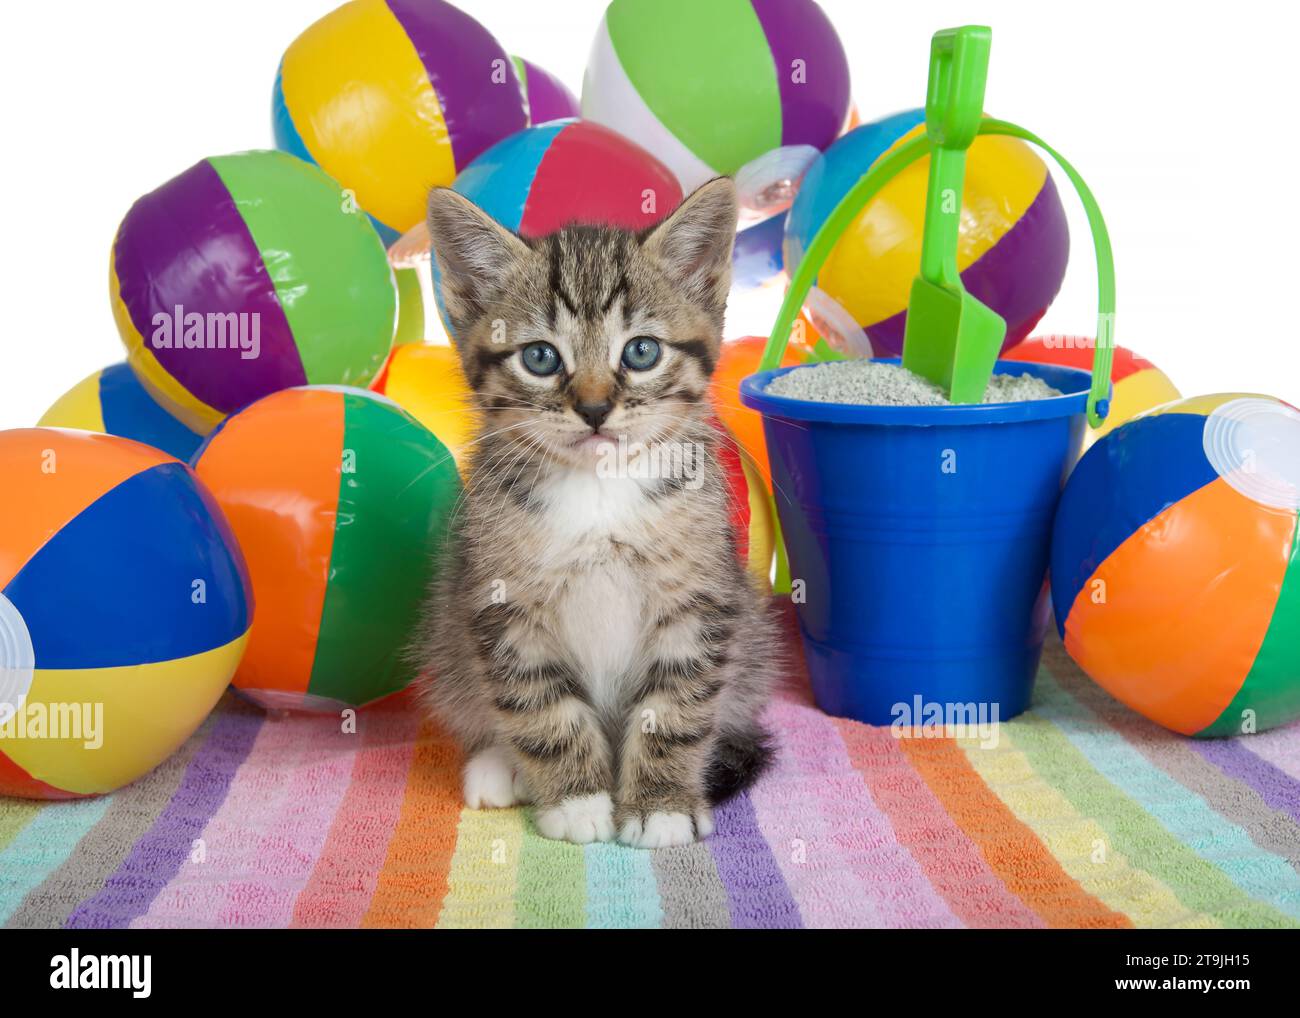 Adorable tabby kitten sitting on a colorful striped towel with small brightly colored beach balls piled up behind him. Sand bucket with shovel. Lookin Stock Photo